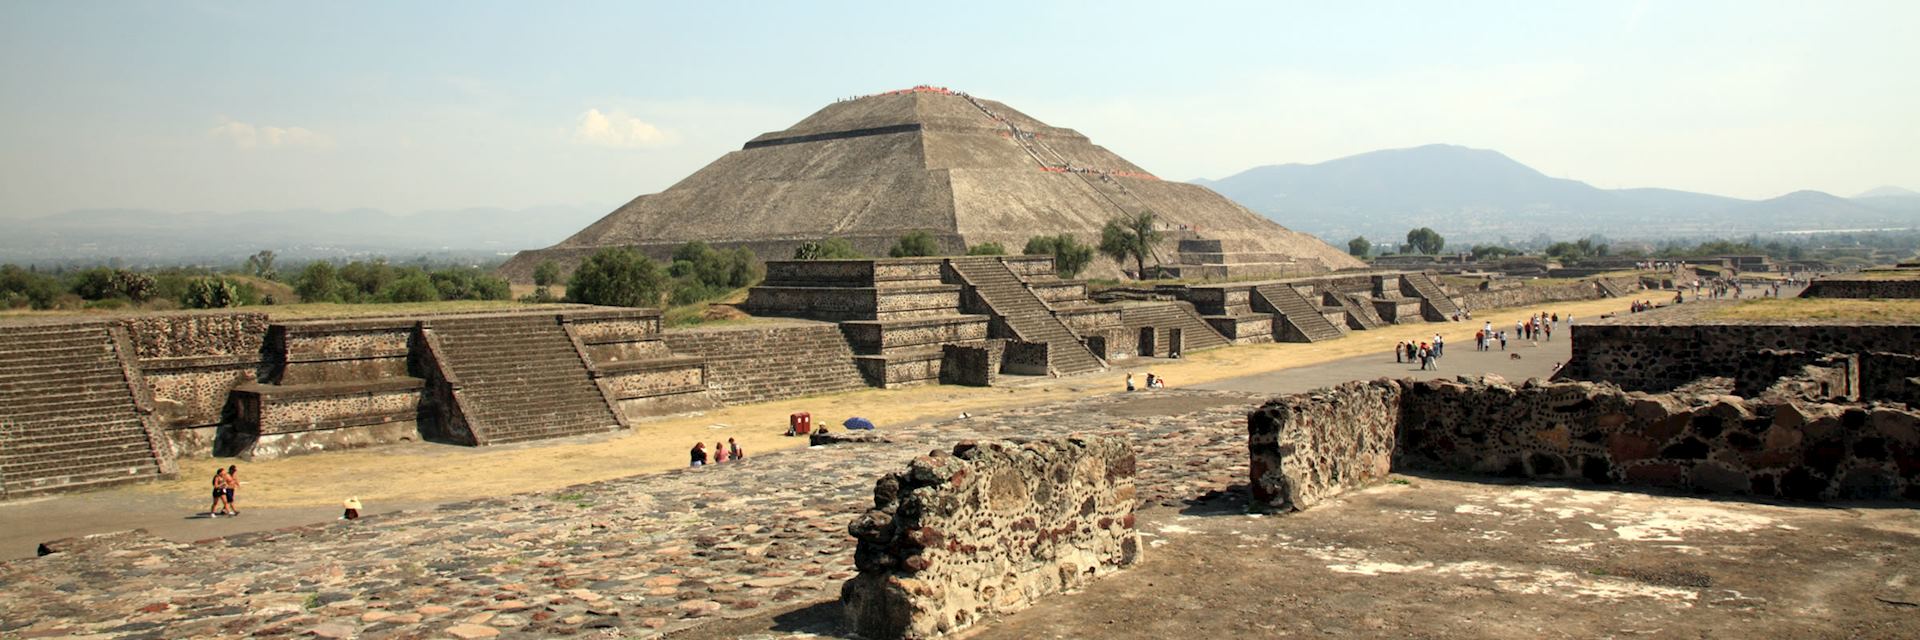 The huge Pyramid of the Sun at Teotihuacán